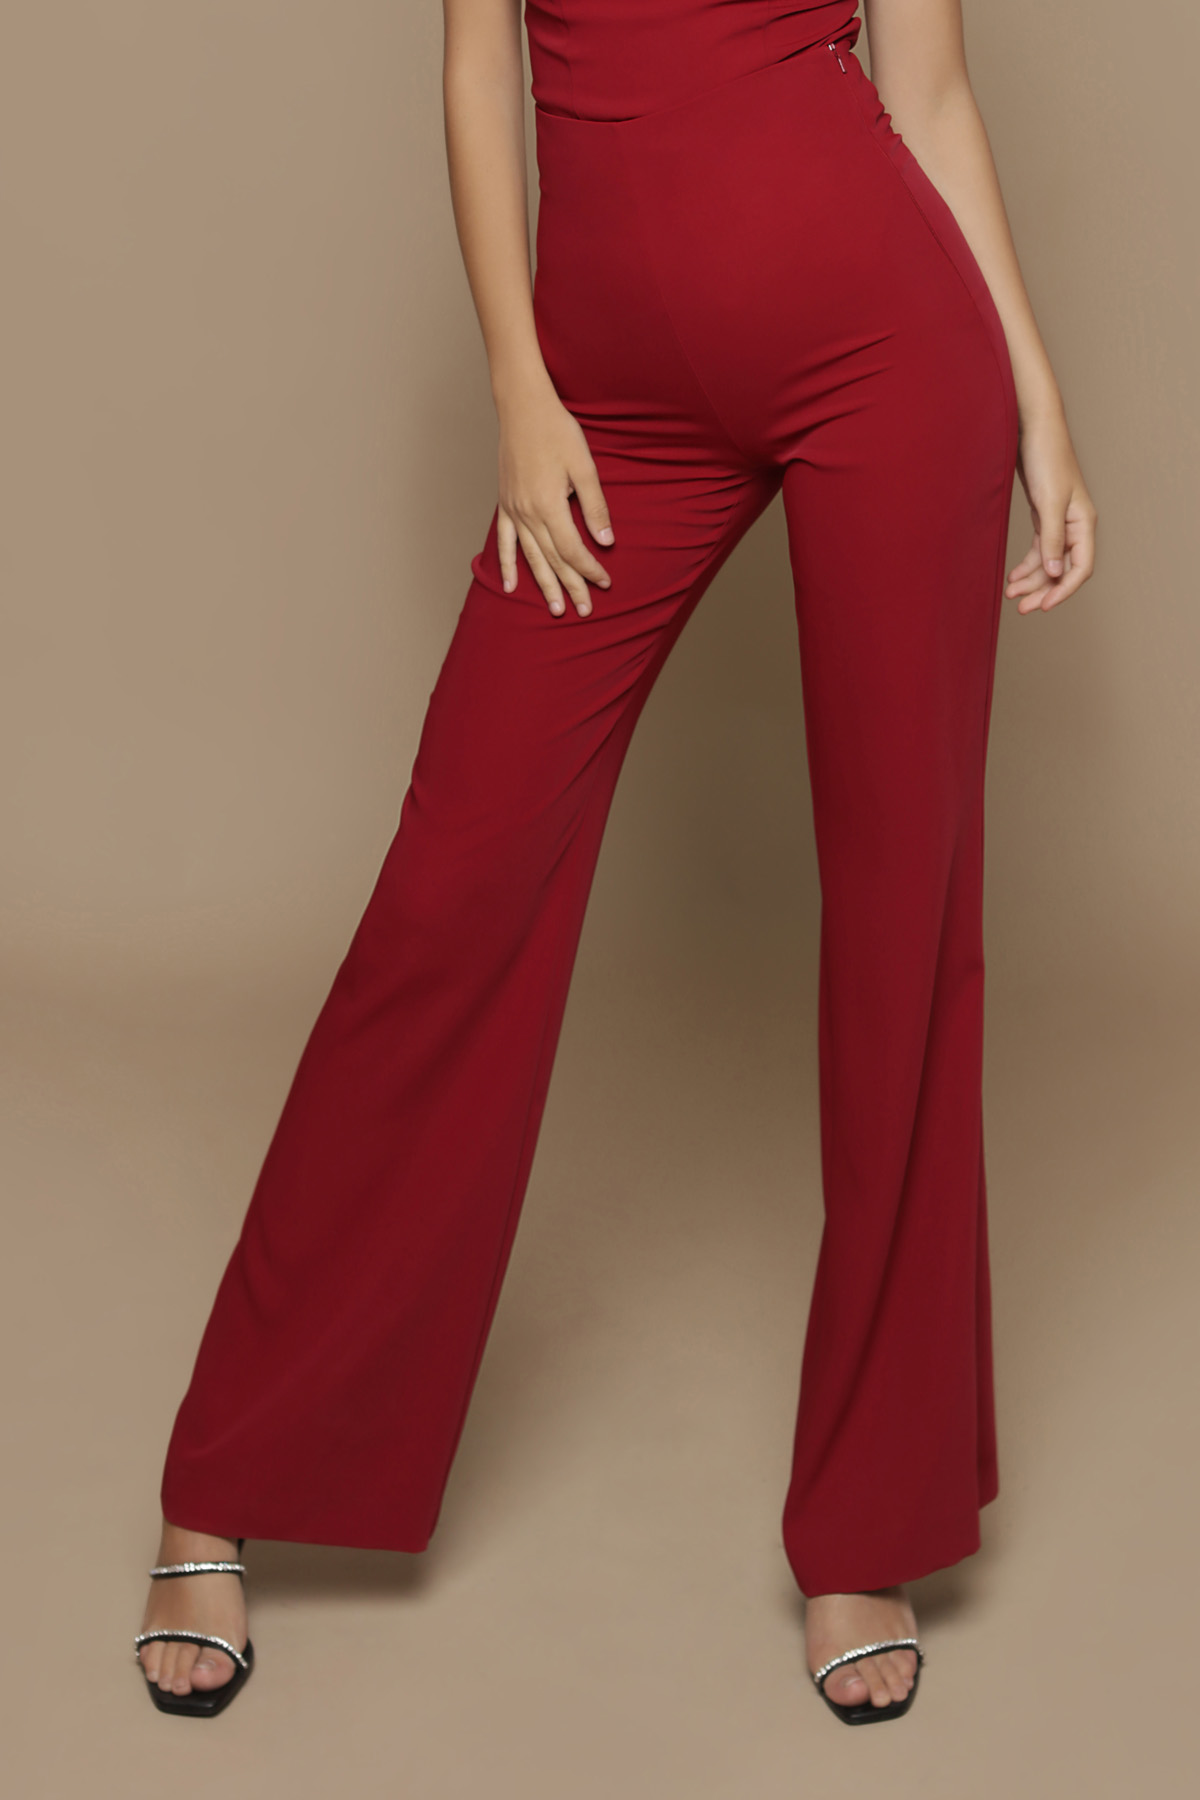 Picture of BURGUNDY PANTS